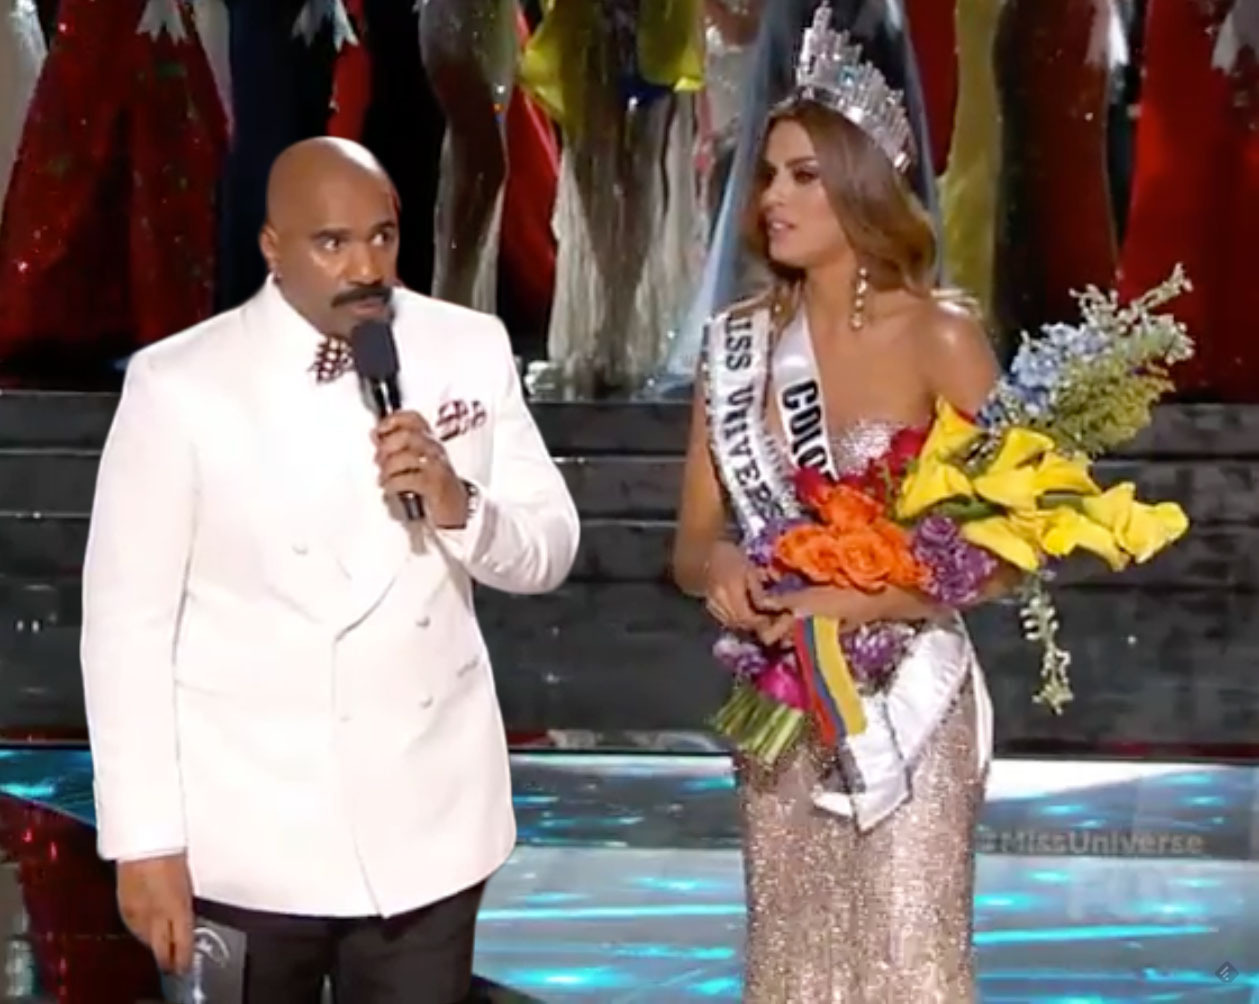 Watch Steve Harvey’s Awkward Miss Universe FAIL And Then Say Goodnight To 2015Last night, Steve Harvey crowned the wrong woman Miss Universe and what ensued was just as uncomfortable as you’d expect.